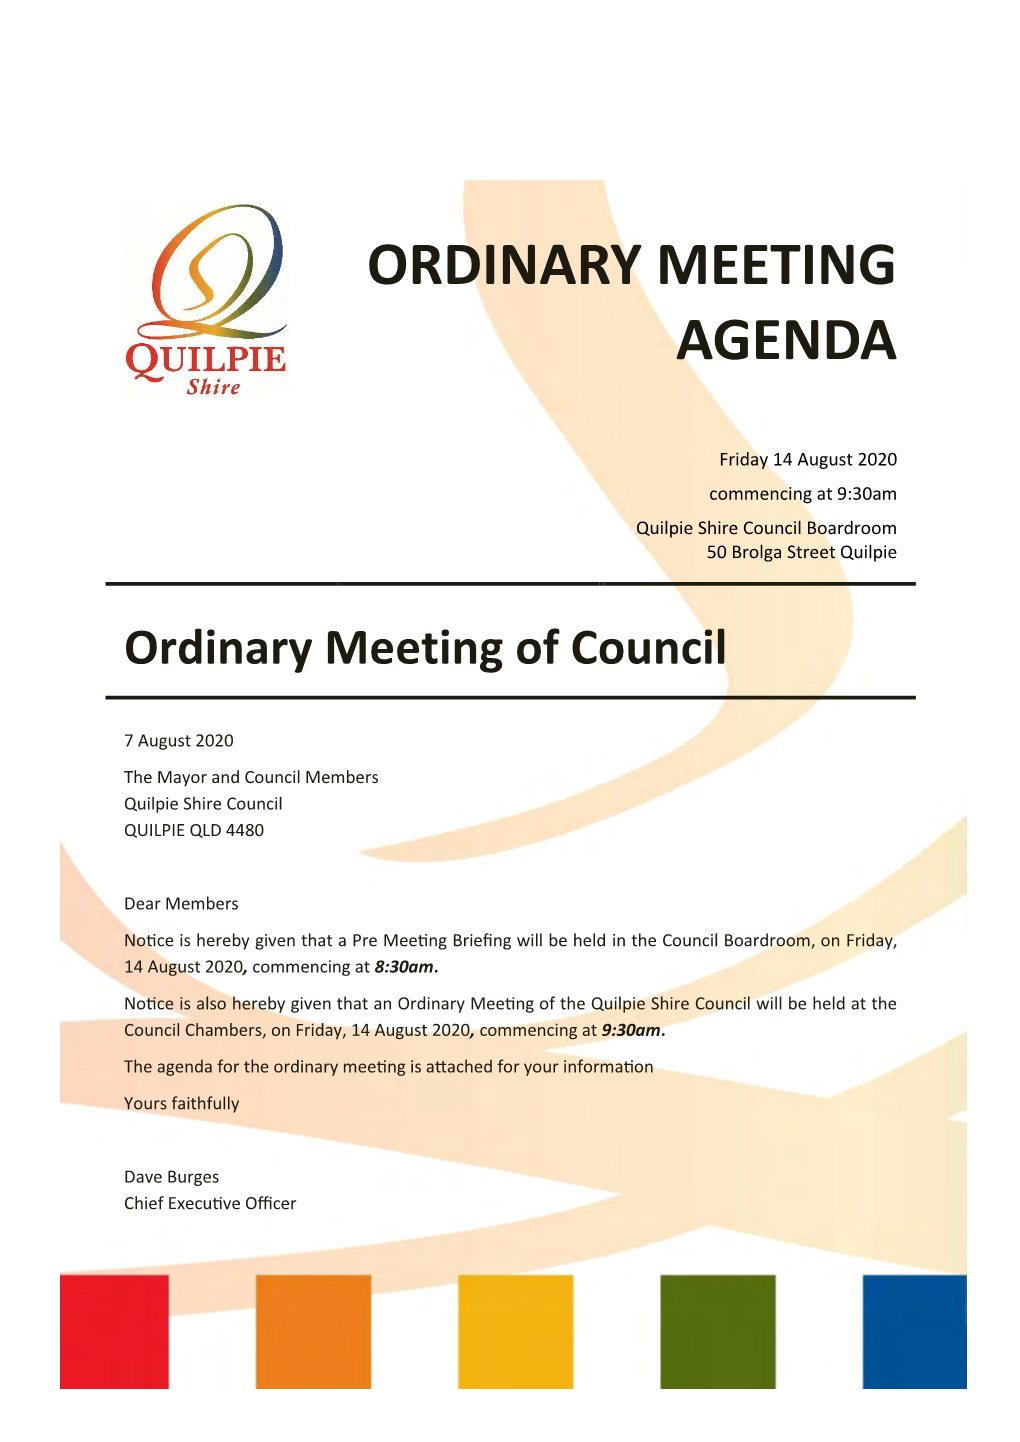 Agenda – Ordinary Meeting of Council Friday 14 August 2020